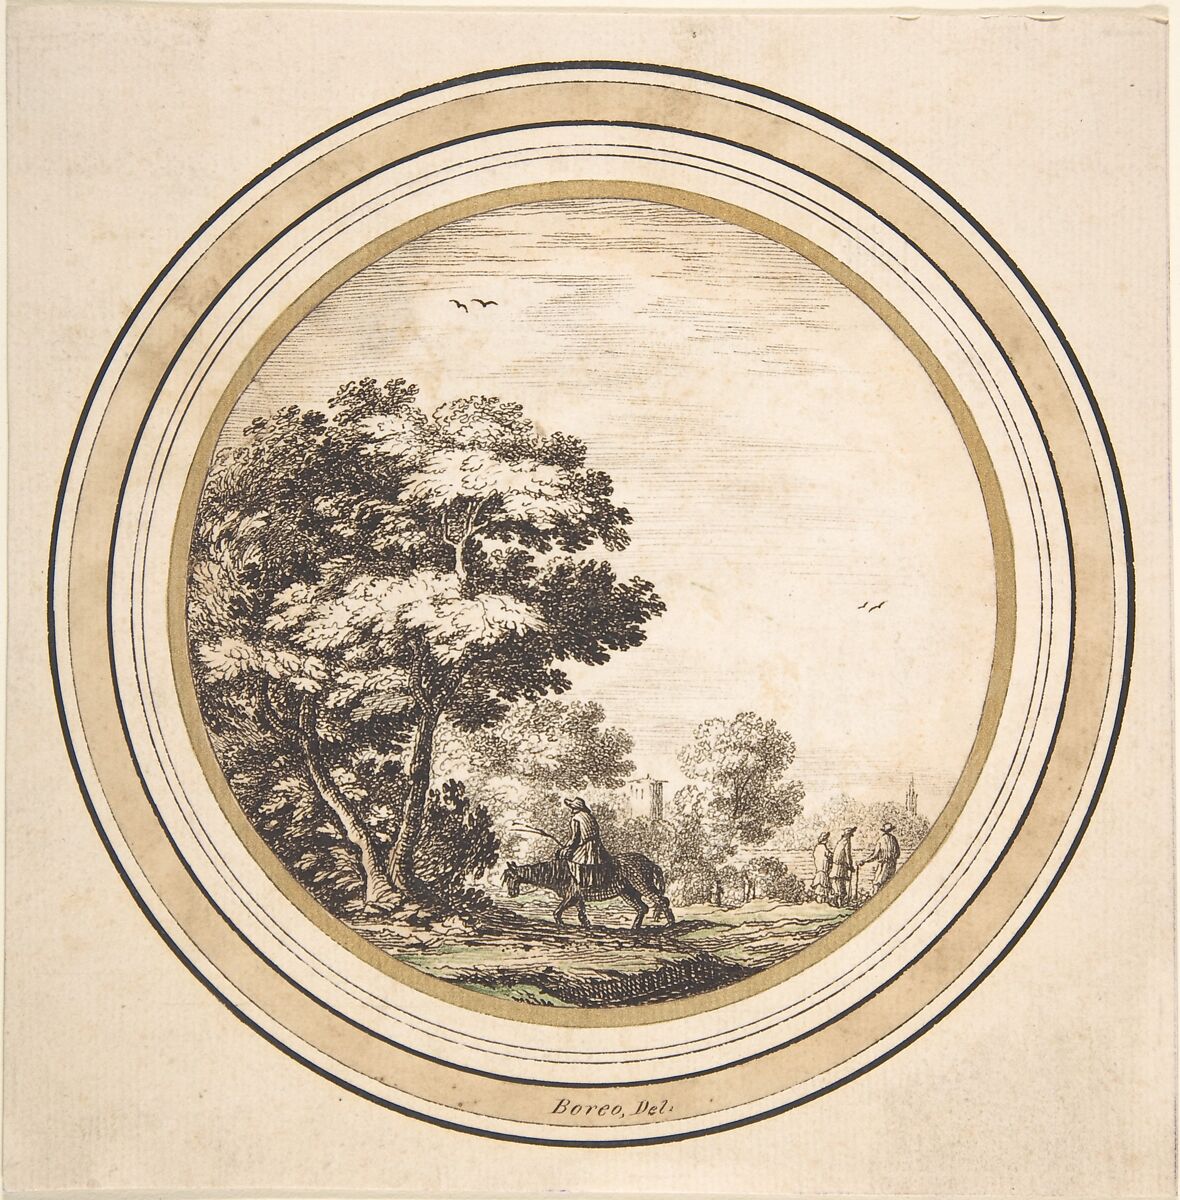 Man on a Donkey in a Landscape, Anonymous, Netherlandish, 16th century, Pen and dark brown ink, green wash.  Laid down on cardboard mount with gold, black, and brown framing lines. 